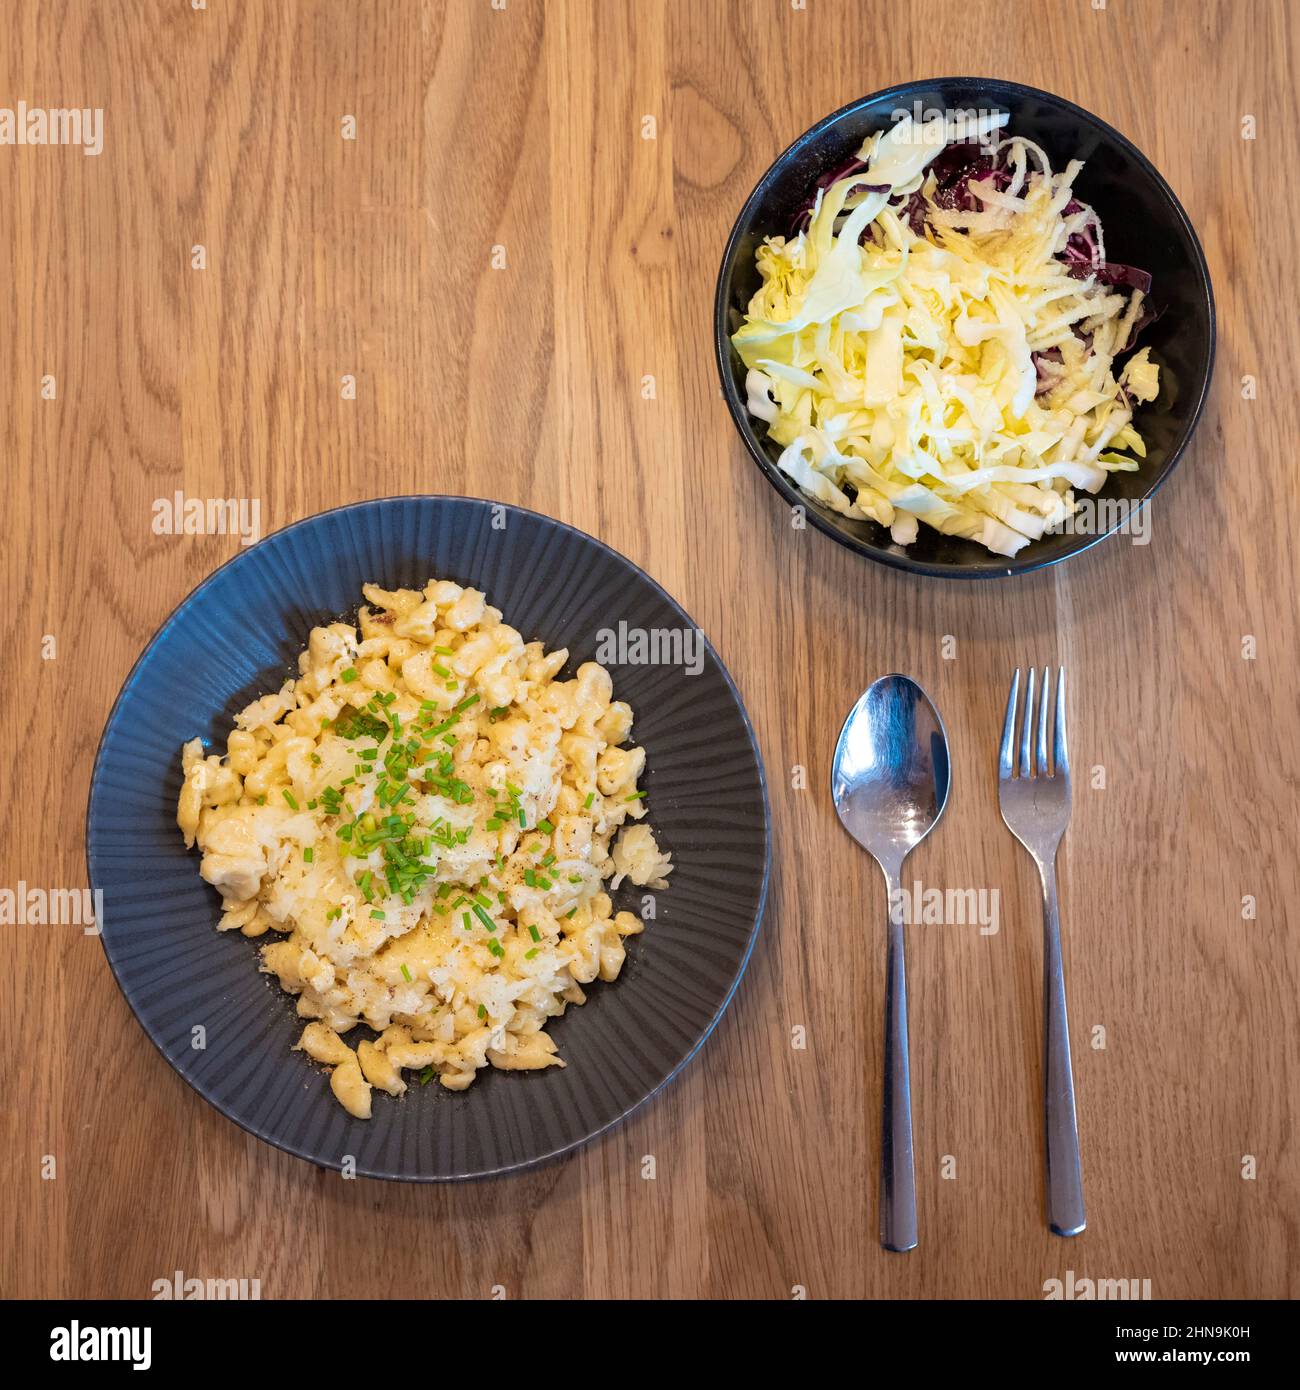 Cheese spaetzle with onion and chives served with coleslaw bowl on wood table Stock Photo